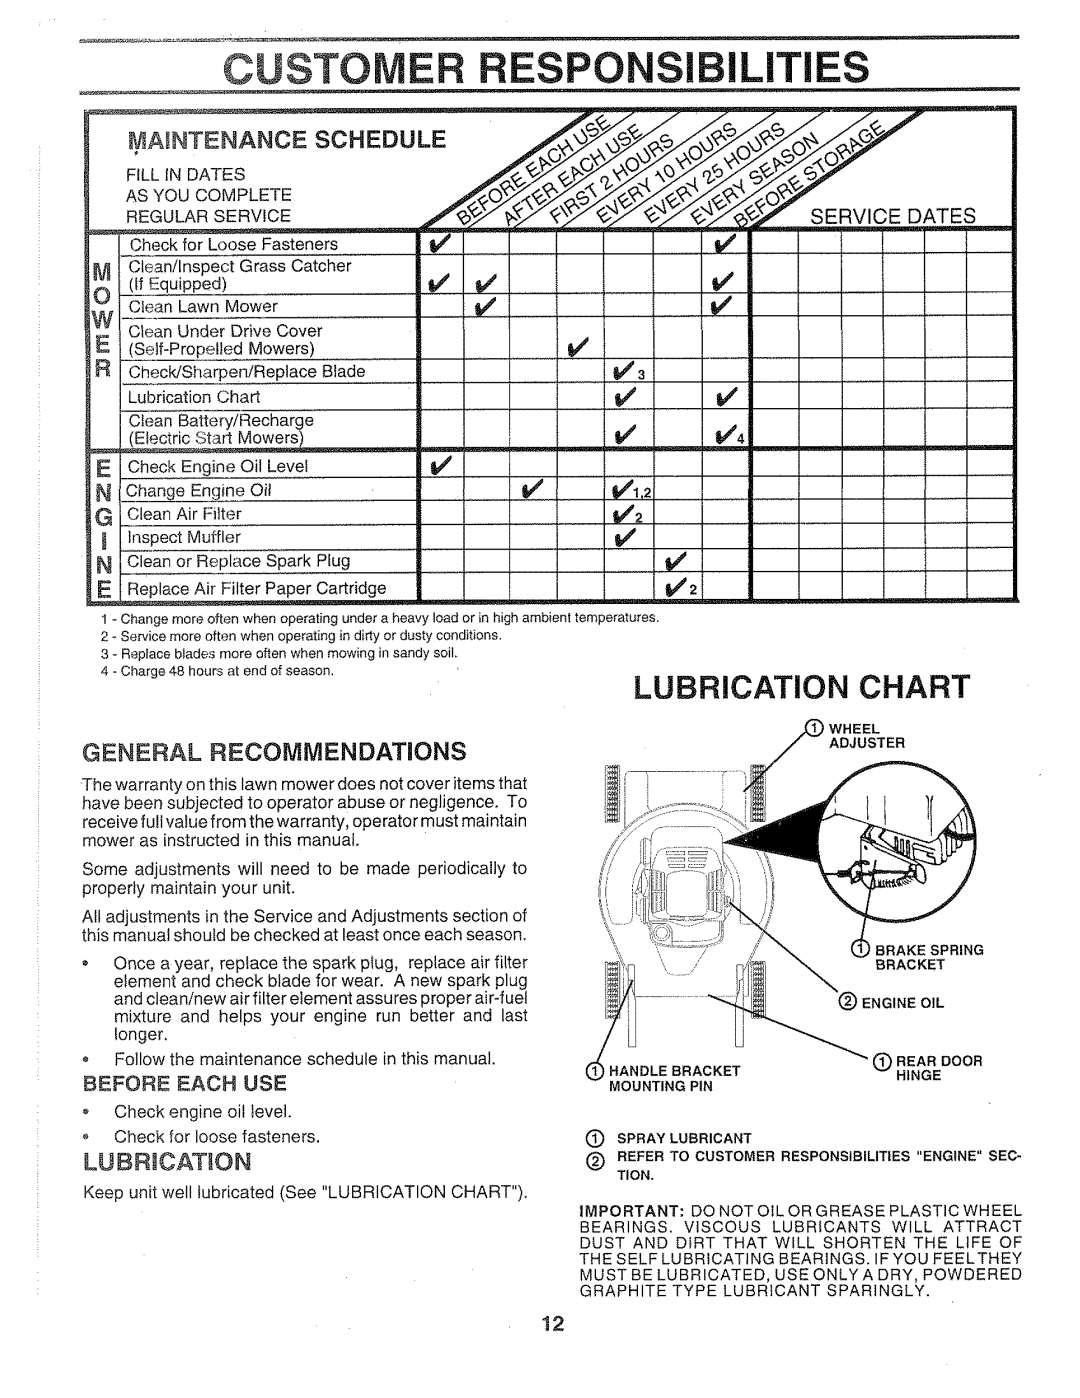 Sears 917.372851 Custome Respo Ilitie, Lubrication Chart, General Recommendations, LUBRmCAT!ON, Maintenance Schedu Le, 1,2 